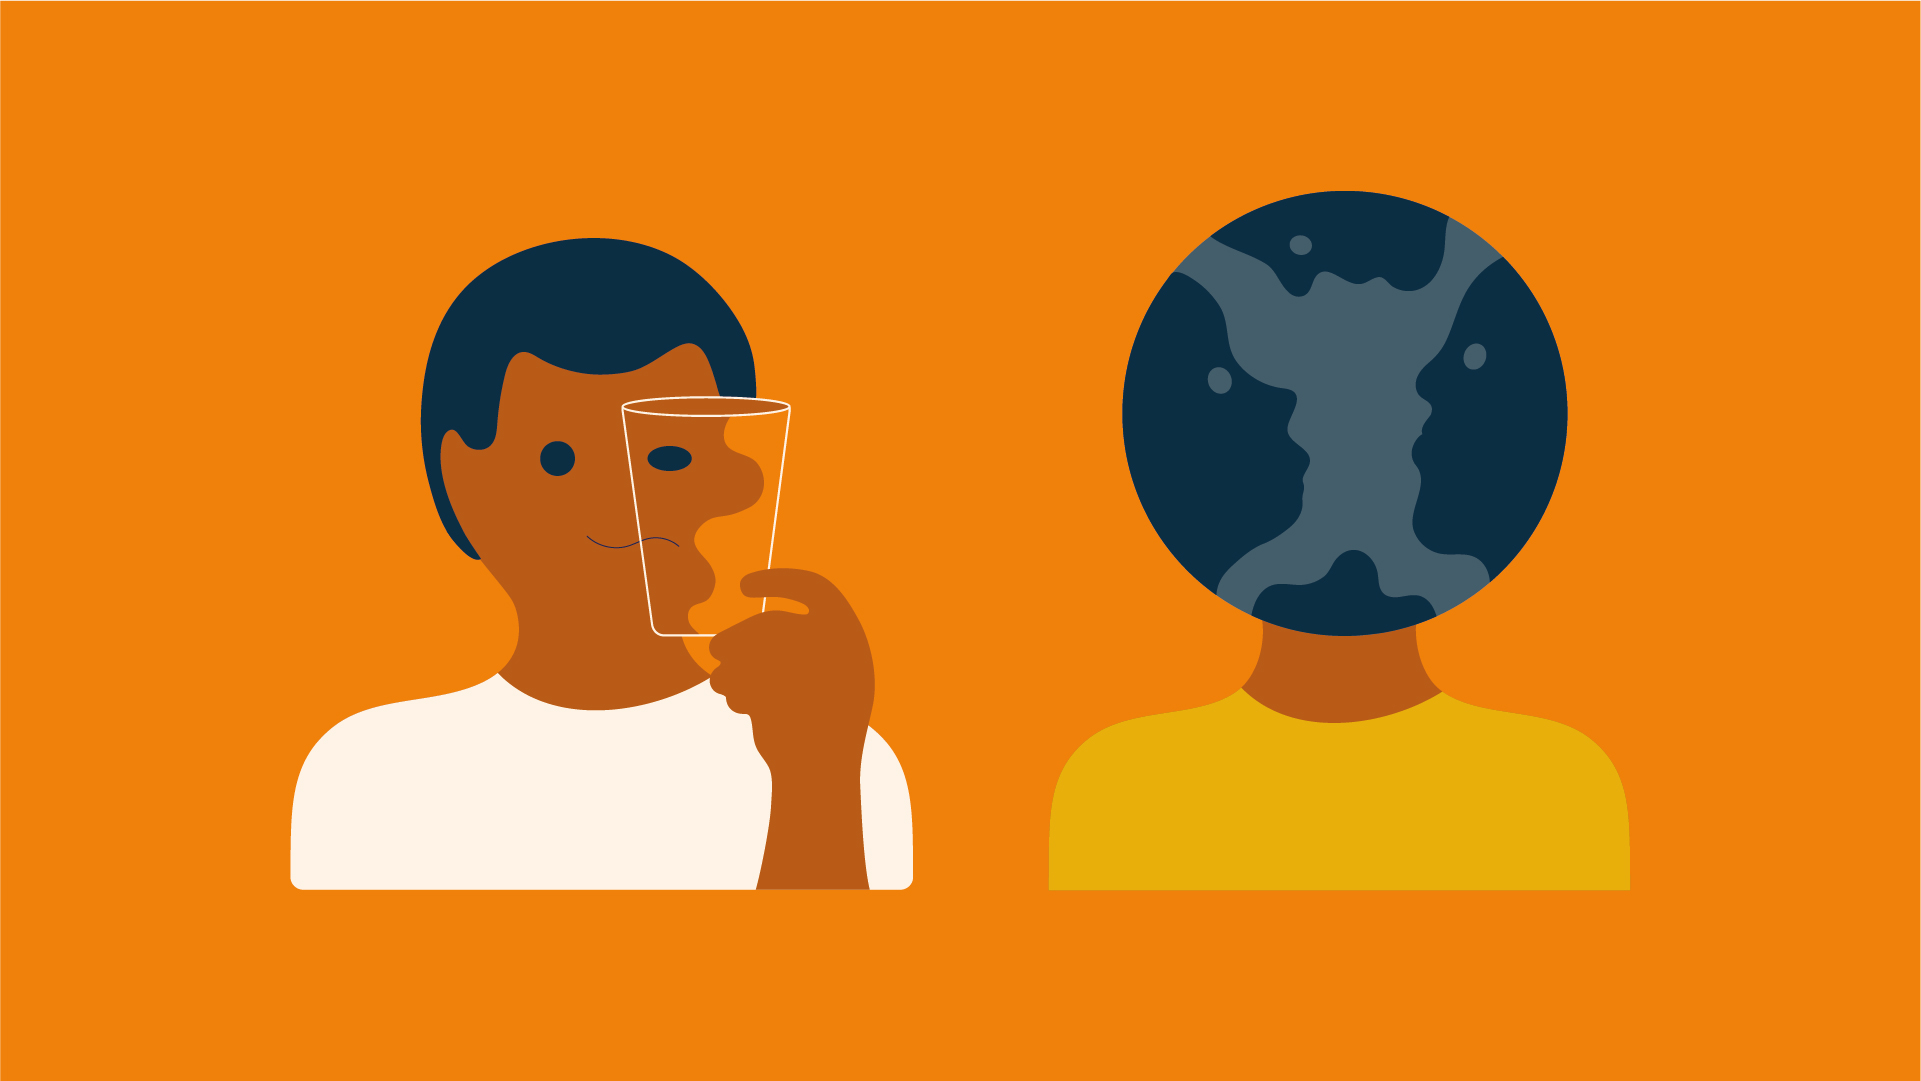 An illustration of two people in front of a yellow background. The person to the left is holding an empty glass in front of one half of their face. The person to the right has a globe on their neck, where their head should be. There are outlines of faces on the globe.